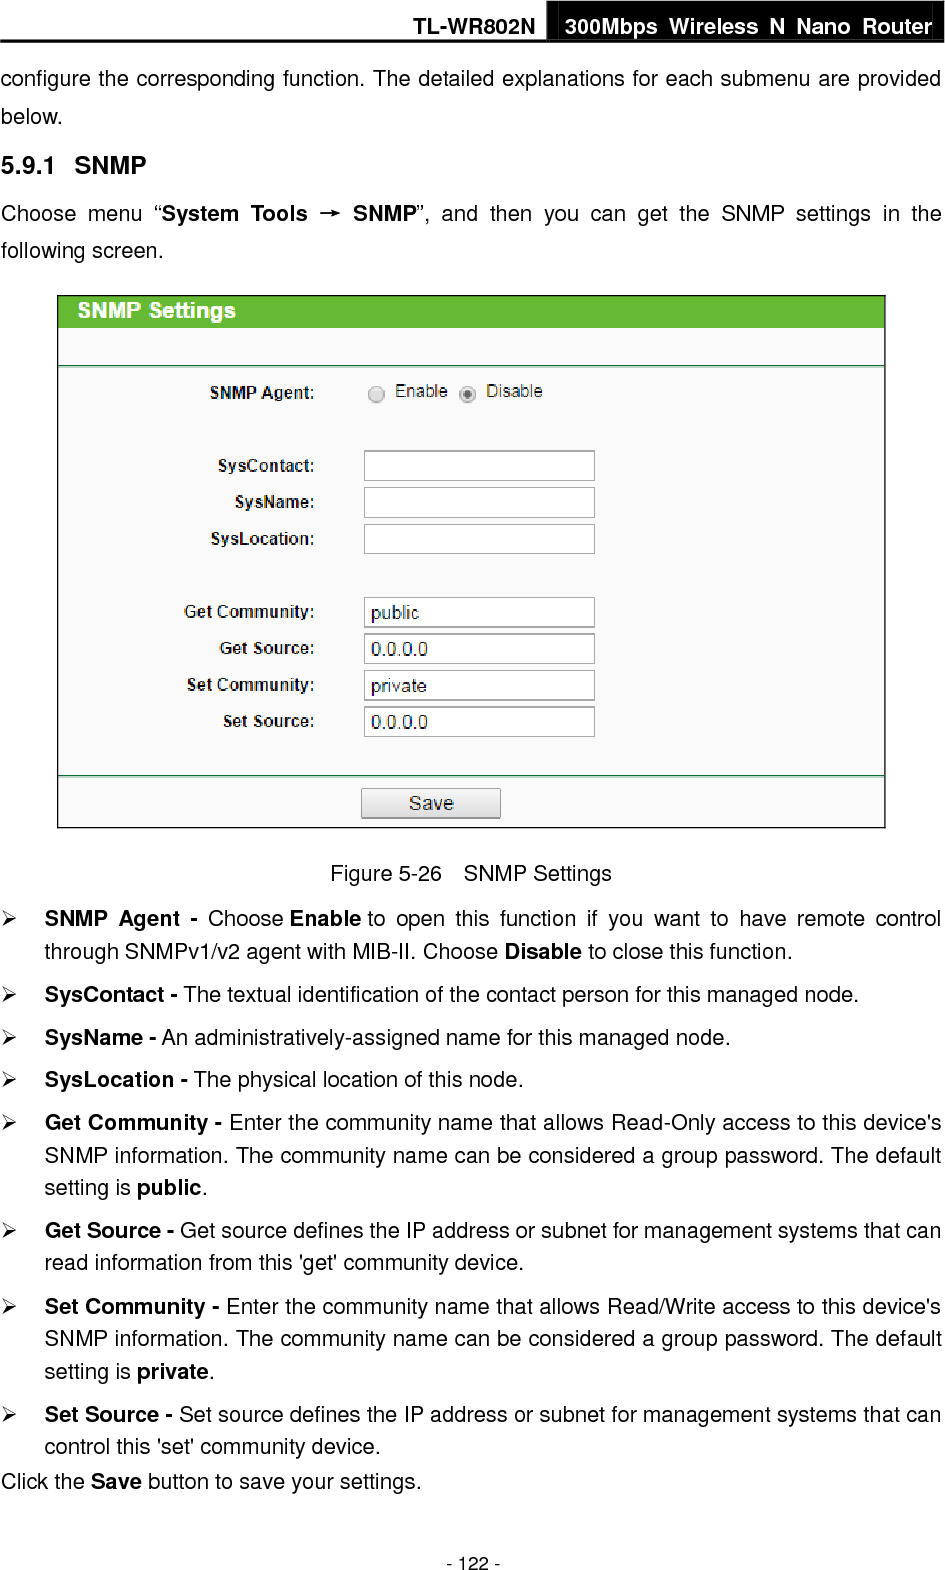 TL-WR802N 300Mbps  Wireless  N  Nano  Router  - 122 - configure the corresponding function. The detailed explanations for each submenu are provided below. 5.9.1  SNMP Choose  menu  “System  Tools  →  SNMP”,  and  then  you  can  get  the  SNMP  settings  in  the following screen.  Figure 5-26    SNMP Settings  SNMP  Agent  -  Choose Enable to  open  this  function  if  you  want  to  have  remote  control through SNMPv1/v2 agent with MIB-II. Choose Disable to close this function.  SysContact - The textual identification of the contact person for this managed node.  SysName - An administratively-assigned name for this managed node.  SysLocation - The physical location of this node.  Get Community - Enter the community name that allows Read-Only access to this device&apos;s SNMP information. The community name can be considered a group password. The default setting is public.  Get Source - Get source defines the IP address or subnet for management systems that can read information from this &apos;get&apos; community device.  Set Community - Enter the community name that allows Read/Write access to this device&apos;s SNMP information. The community name can be considered a group password. The default setting is private.  Set Source - Set source defines the IP address or subnet for management systems that can control this &apos;set&apos; community device. Click the Save button to save your settings. 